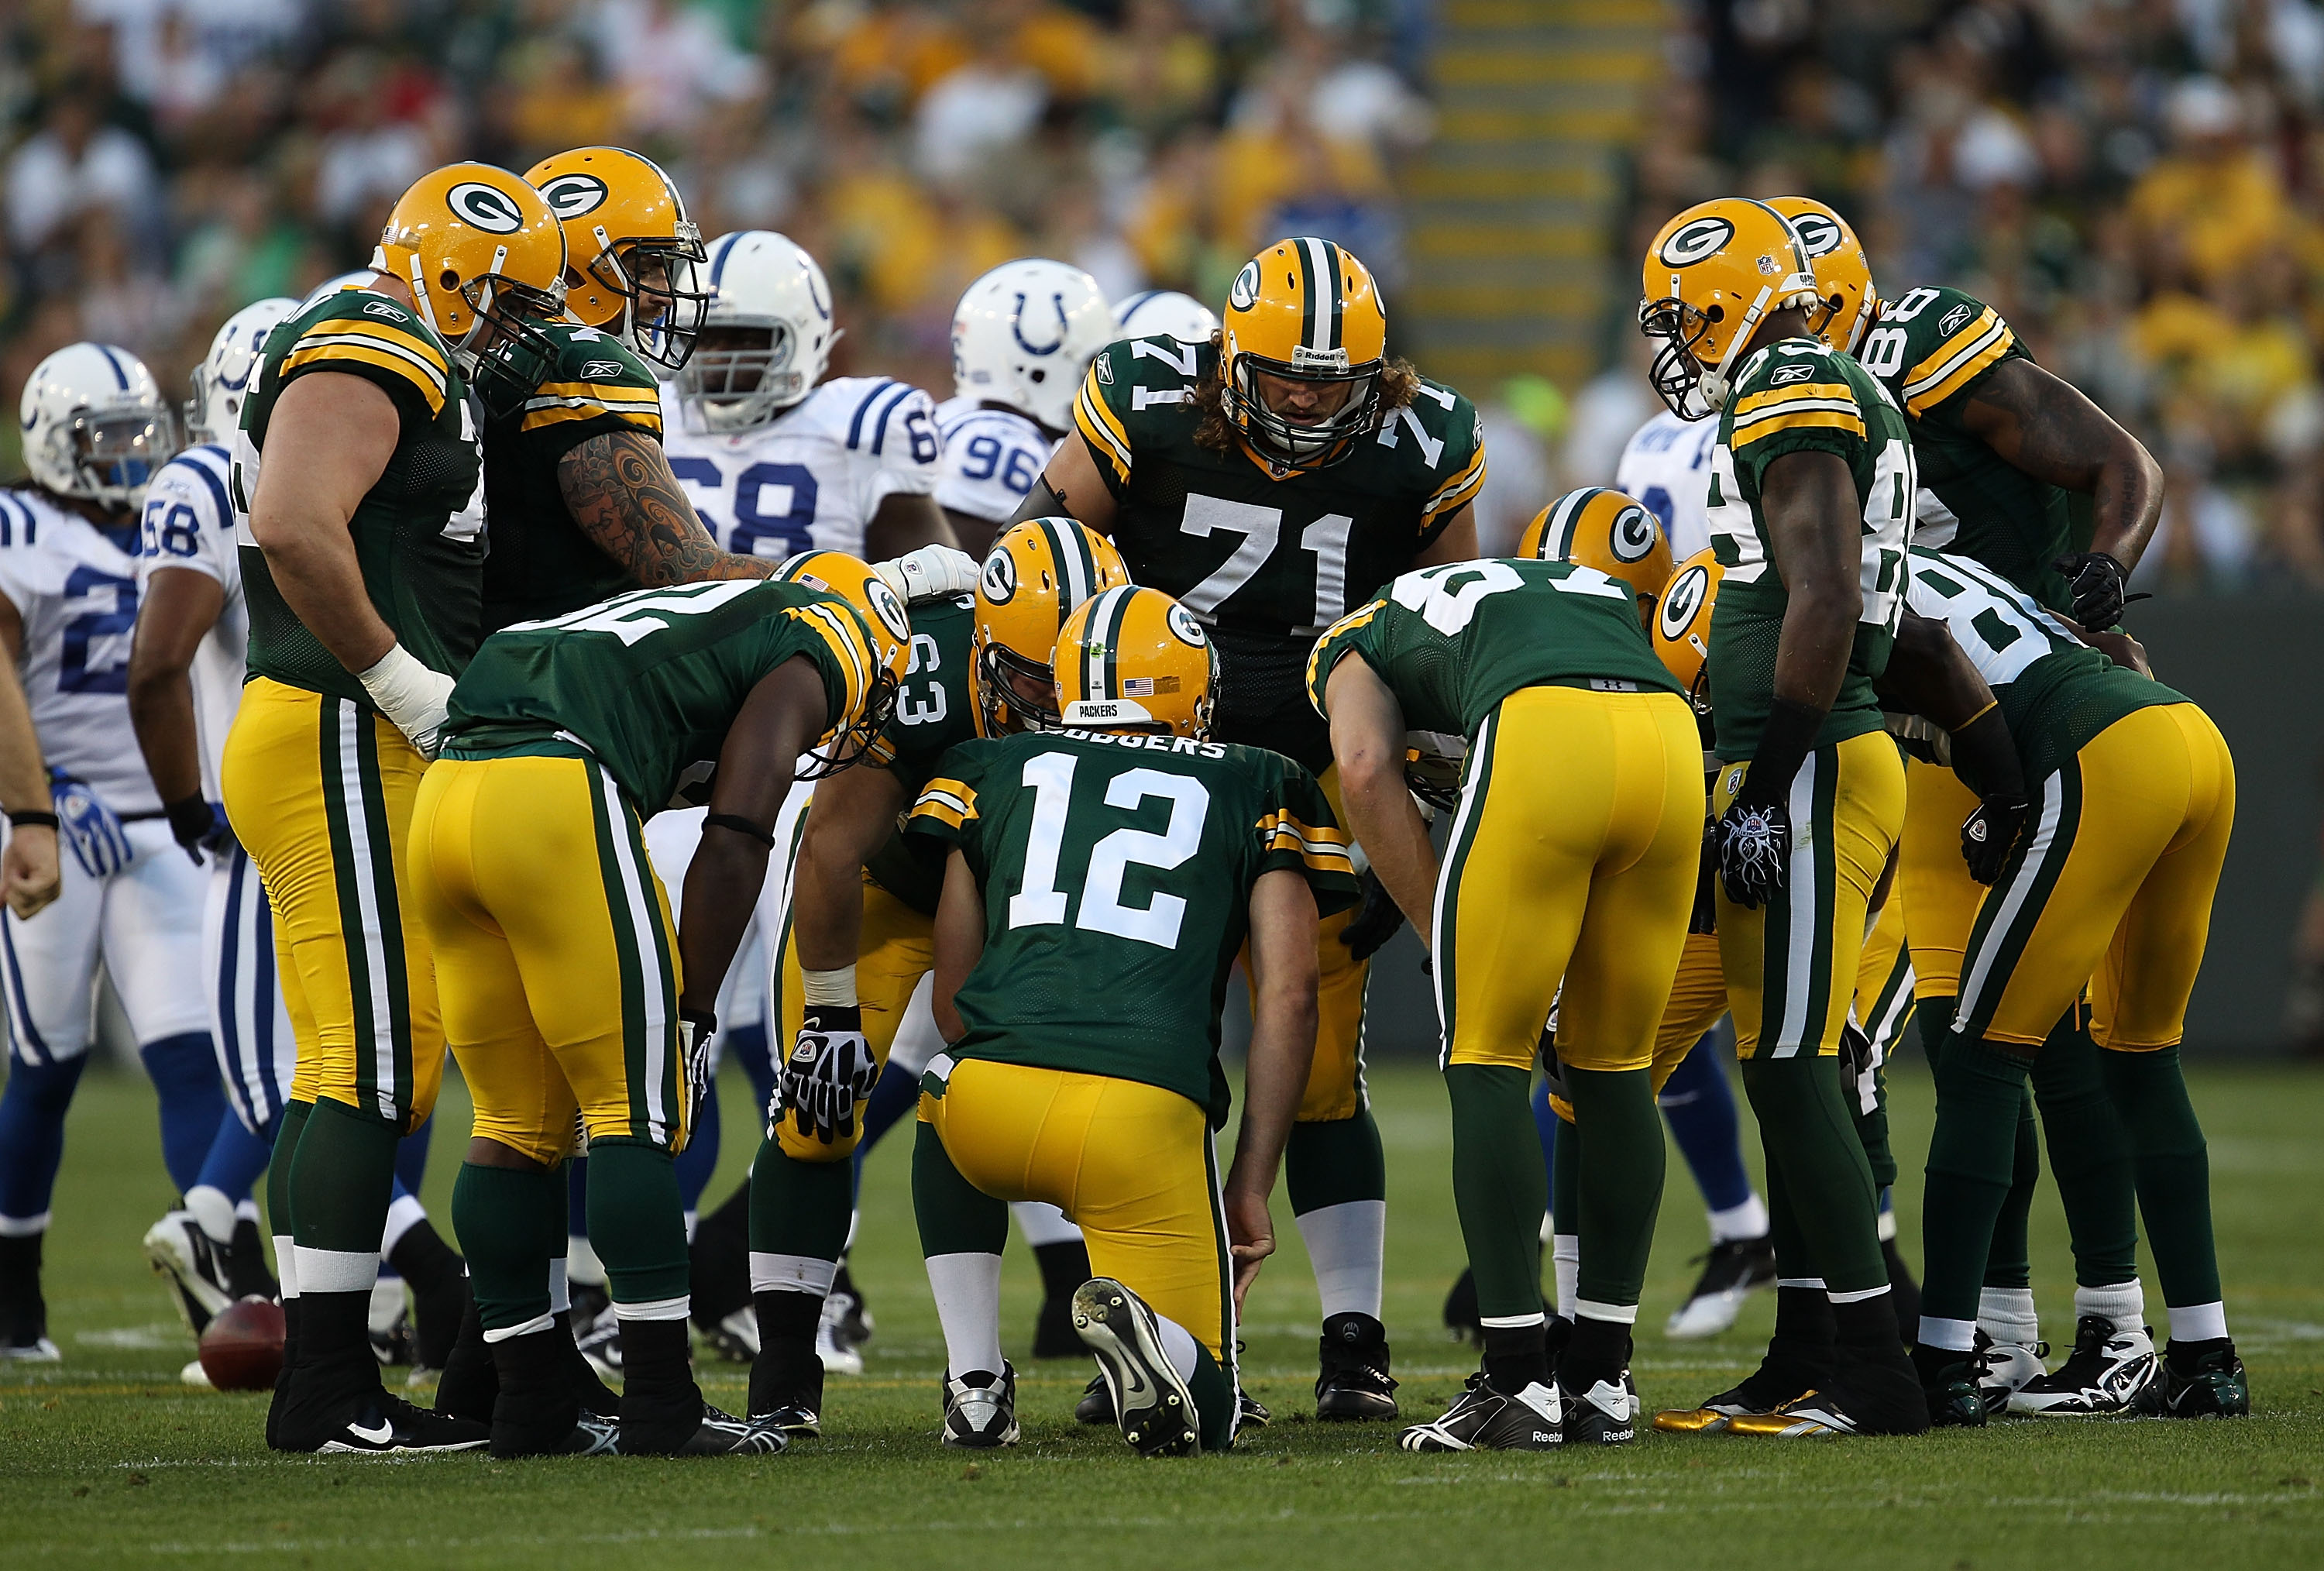 GREEN BAY, WI - AUGUST 26: Aaron Rodgers #12 of the Green Bay Packers calls a play in the huddle against the Indianapolis Colts during a preseason game at Lambeau Field on August 26, 2010 in Green Bay, Wisconsin. The Packers defeated the Colts 59-24. (Pho